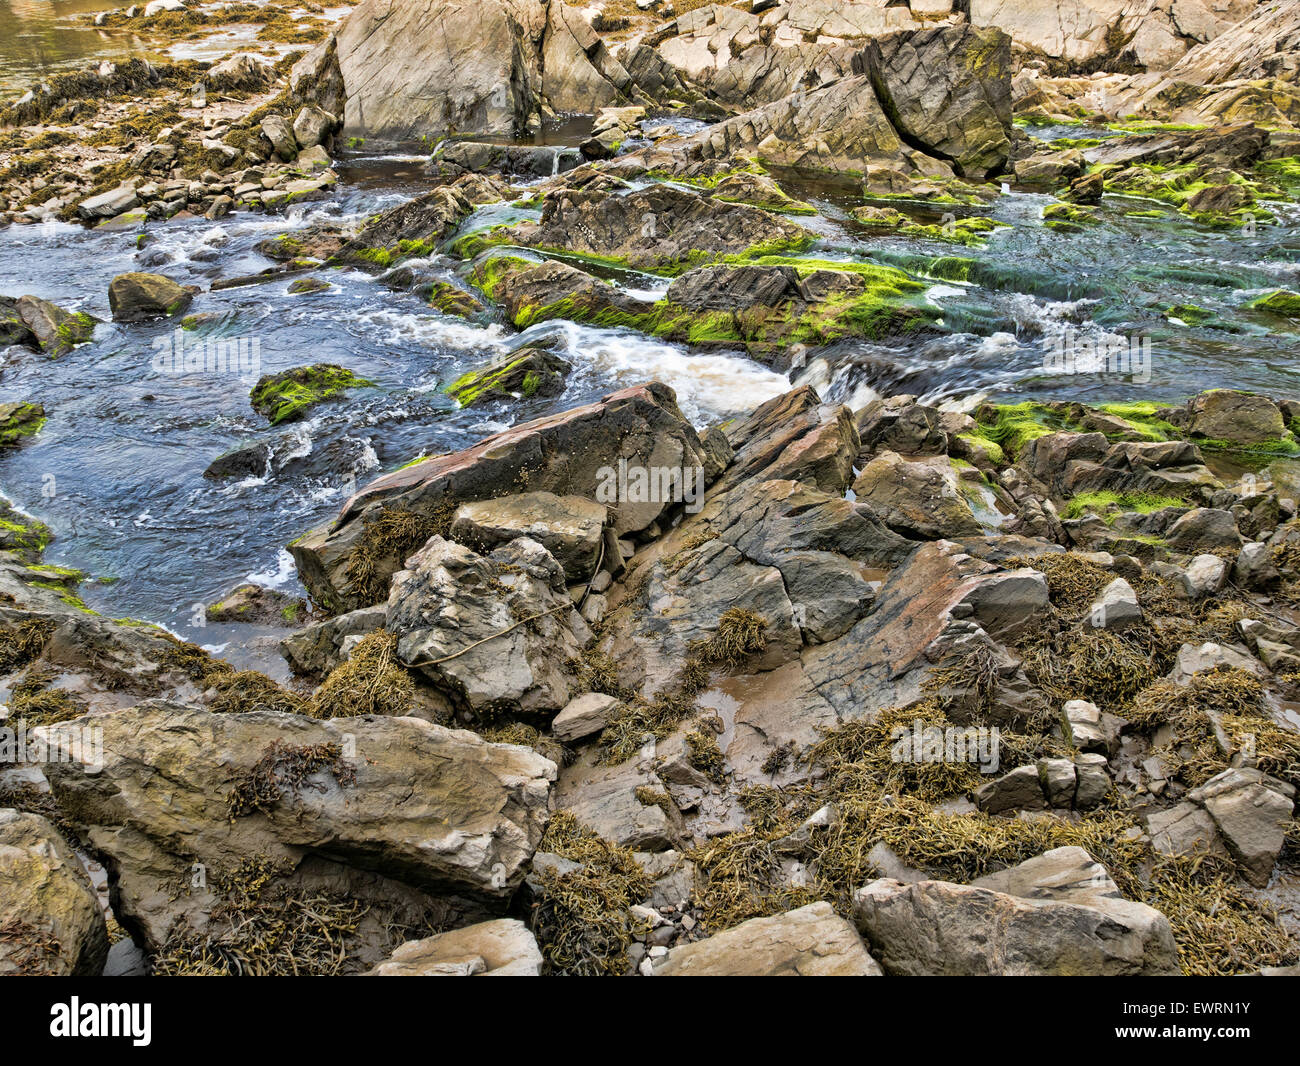 A salt water stream at low tide with large rocks and boulders covered with green algae and seaweed on the coast of Maine. Stock Photo